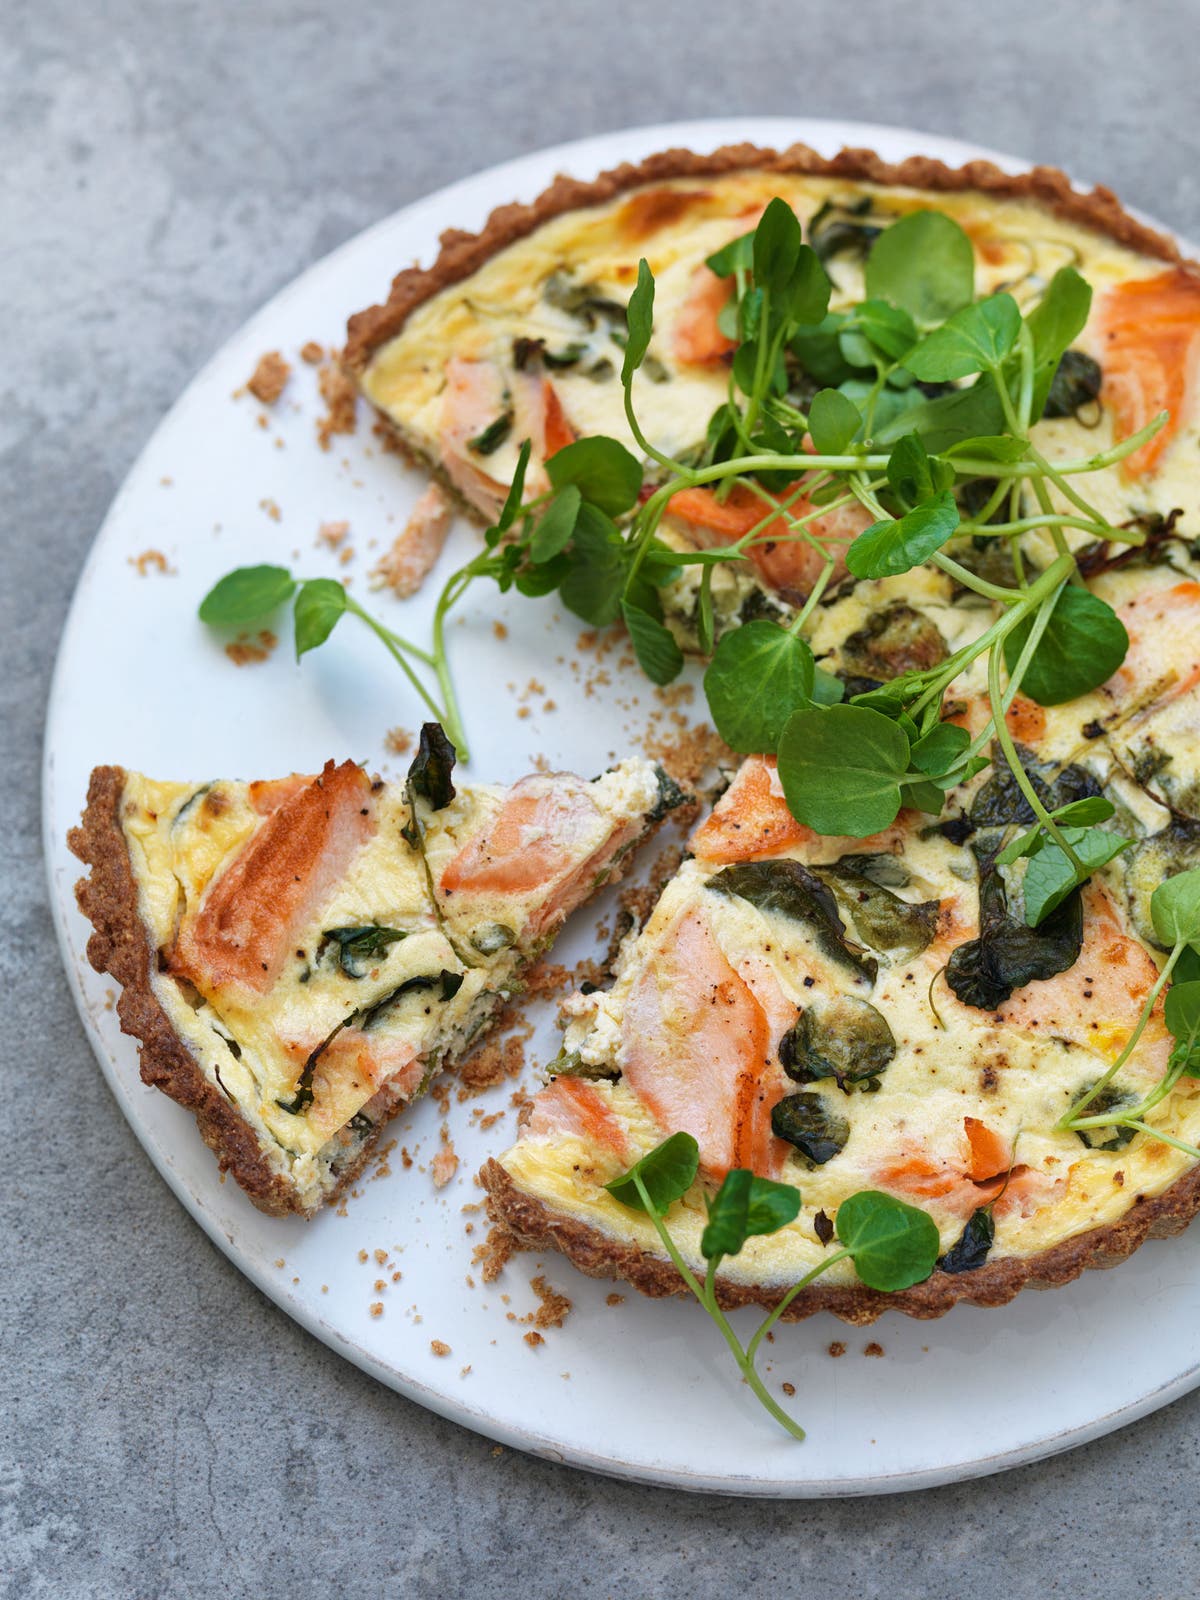 Bill Granger recipes: Our chef's savoury tarts are perfect served cold ...